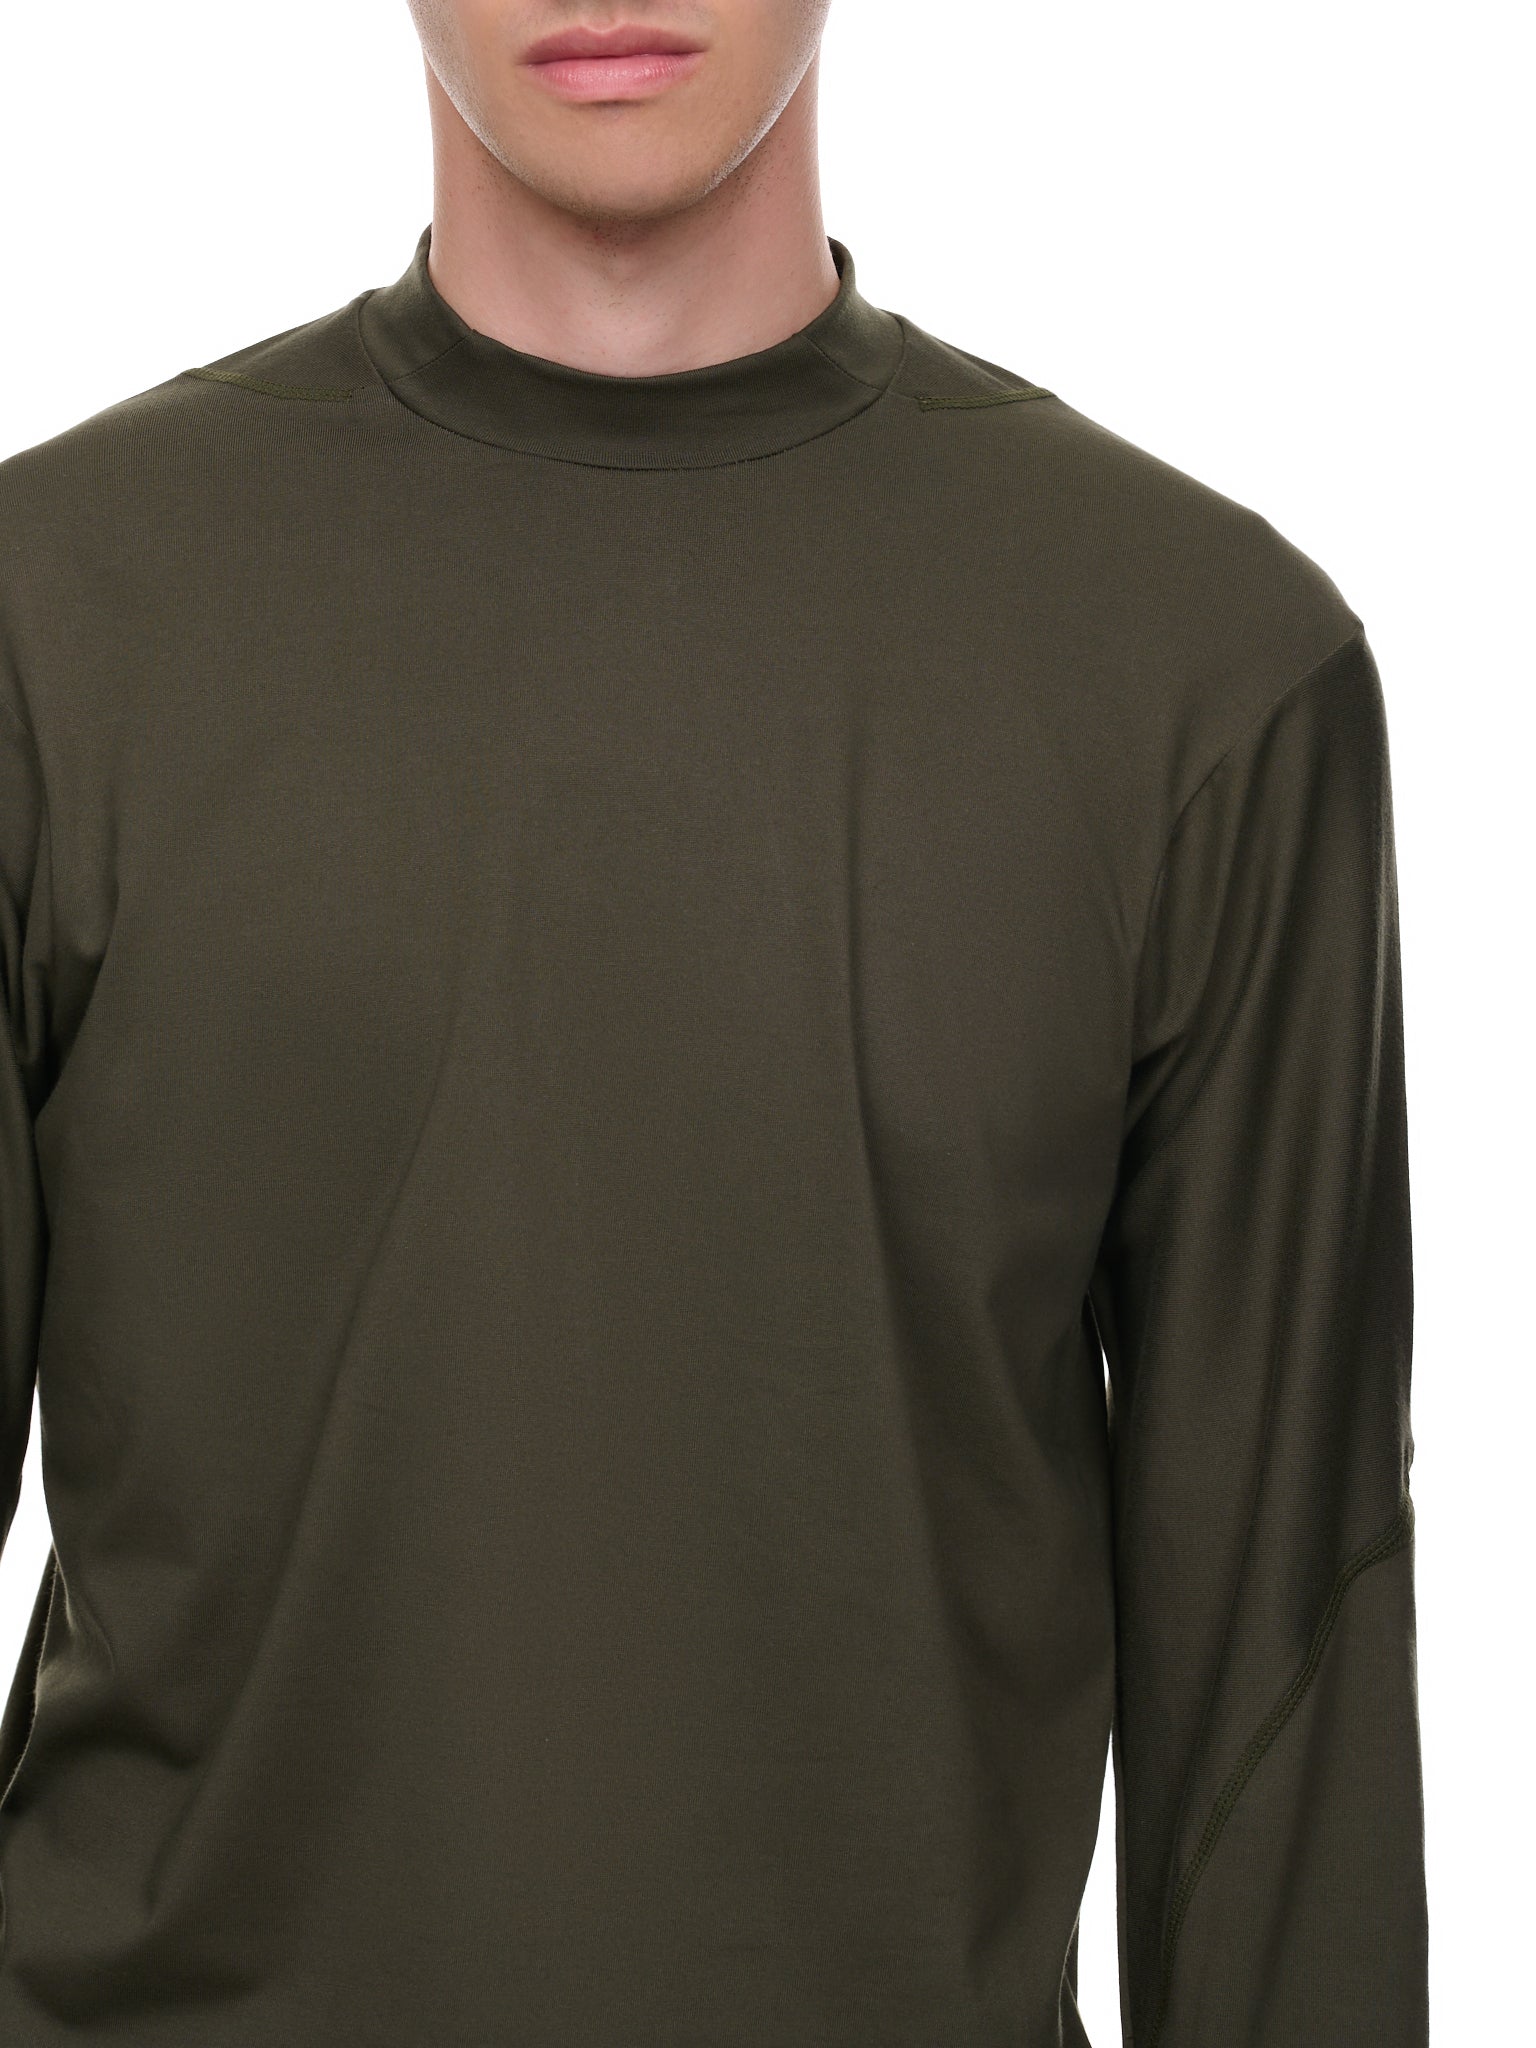 5.0 Right Tee (5-0-RIGHT-OLIVE-GREEN)